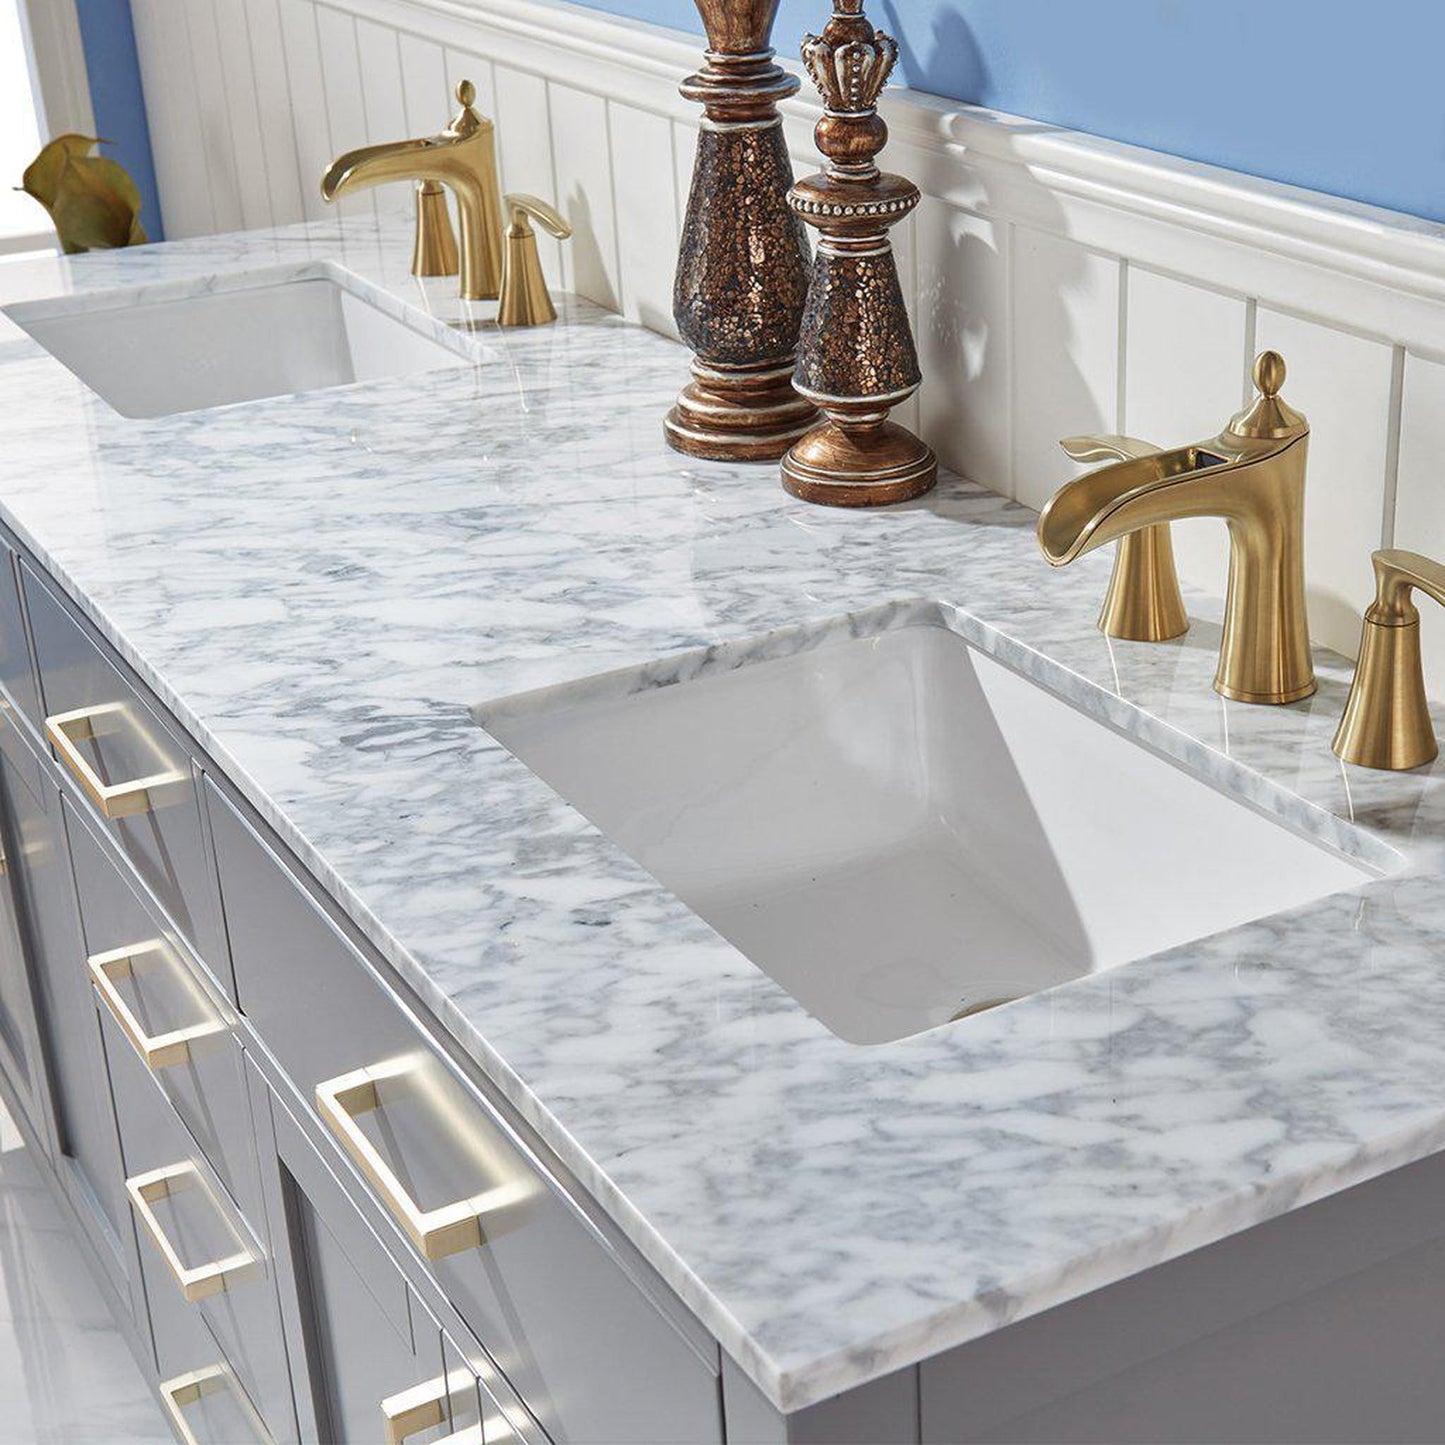 Altair Ivy 72" Double Gray Freestanding Bathroom Vanity Set With Natural Carrara White Marble Top, Two Rectangular Undermount Ceramic Sinks, and Overflow